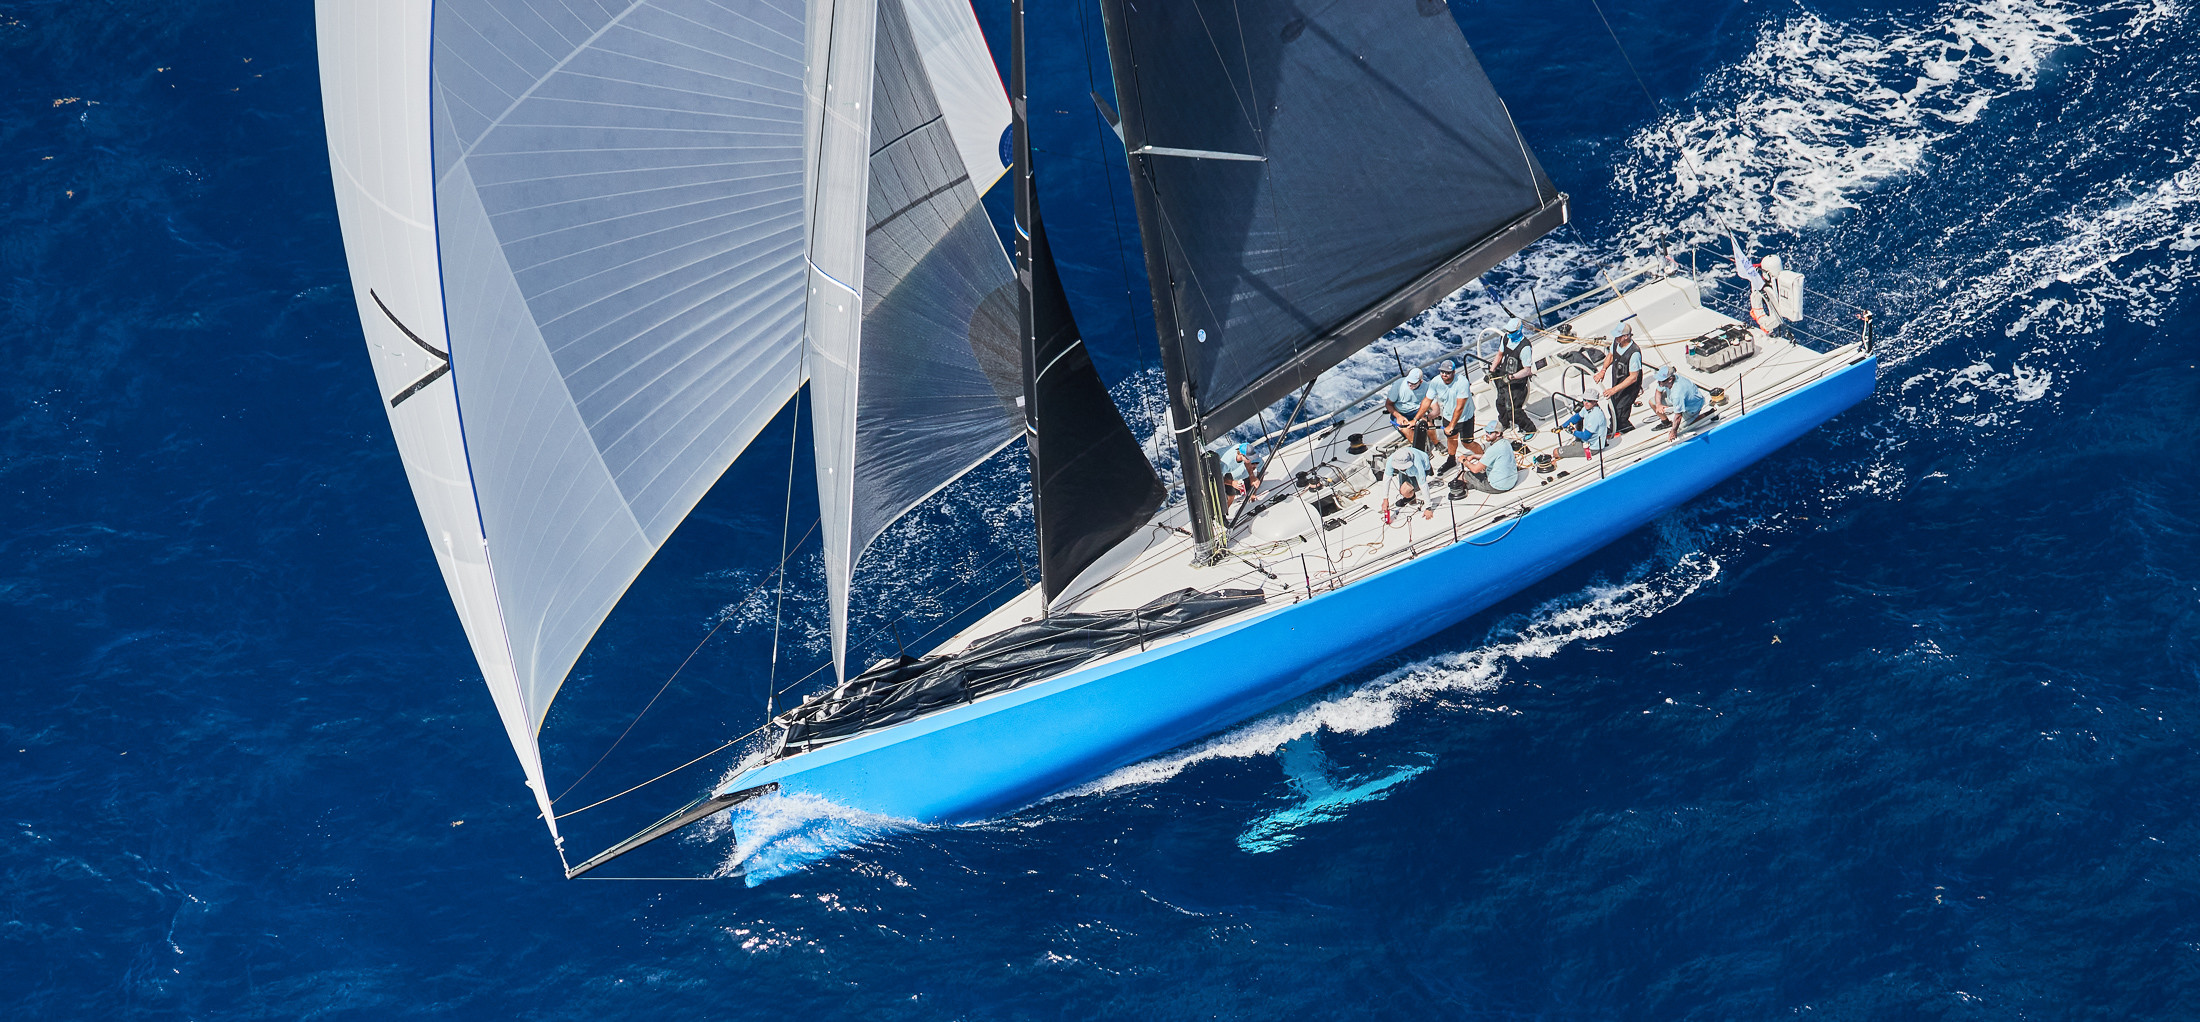 The overall winner of the 13th edition of the RORC Caribbean 600 is Christopher Sheahan’s Pac52 Warrior One (USA) © Robert Hajduk